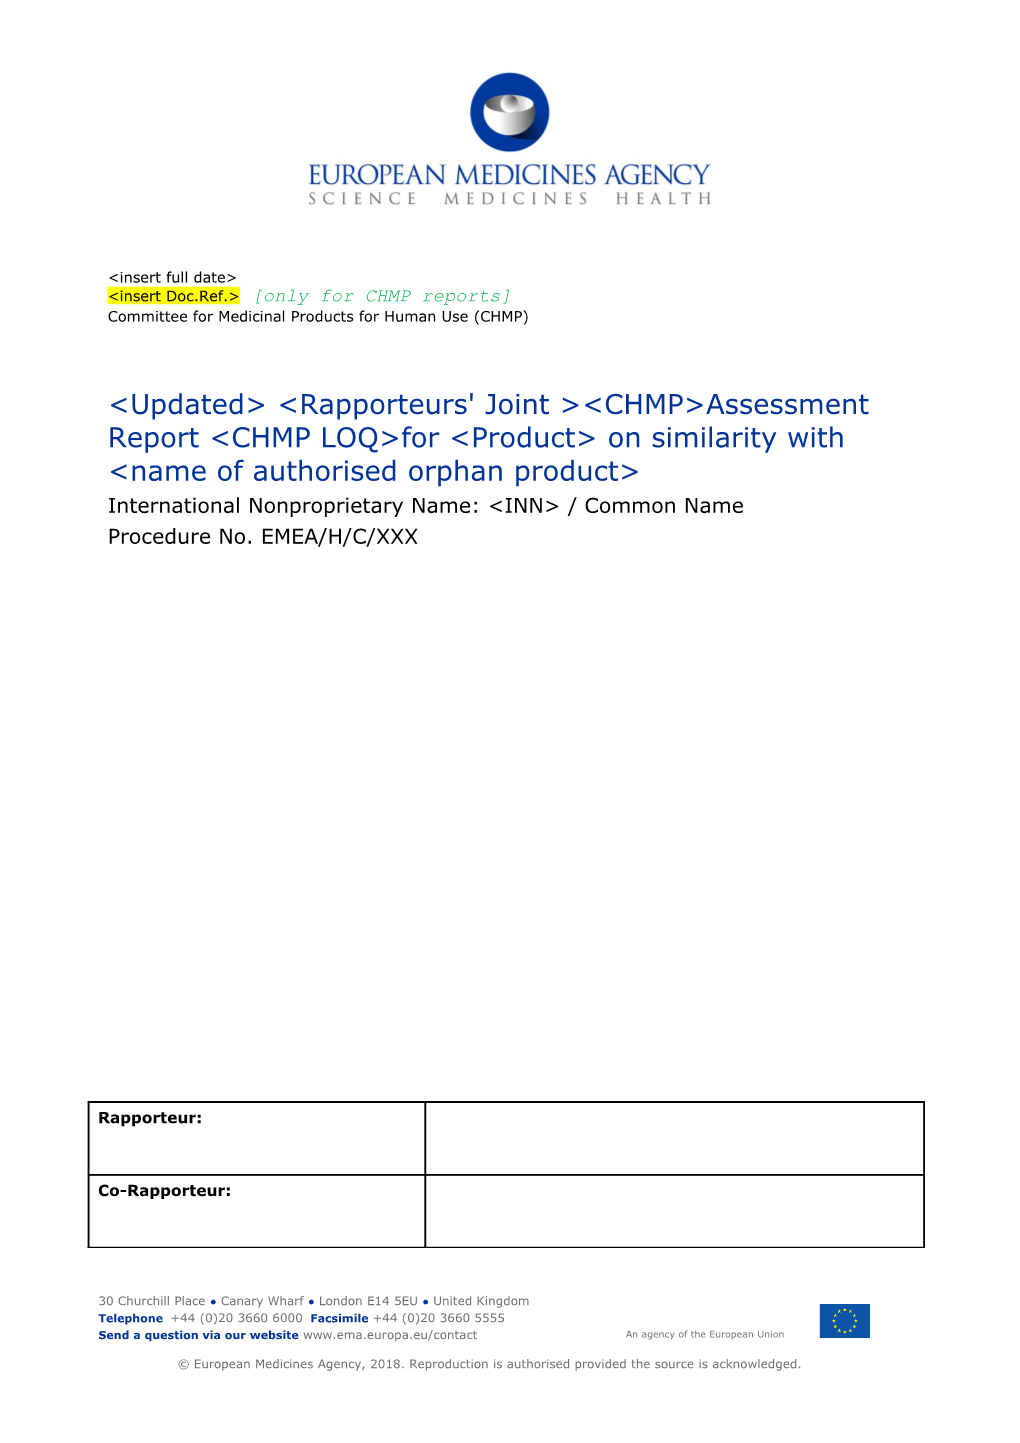 CHMP and Rapporteurs' Joint Assessment Report Template on Assessment of Similarity Rev 07.18